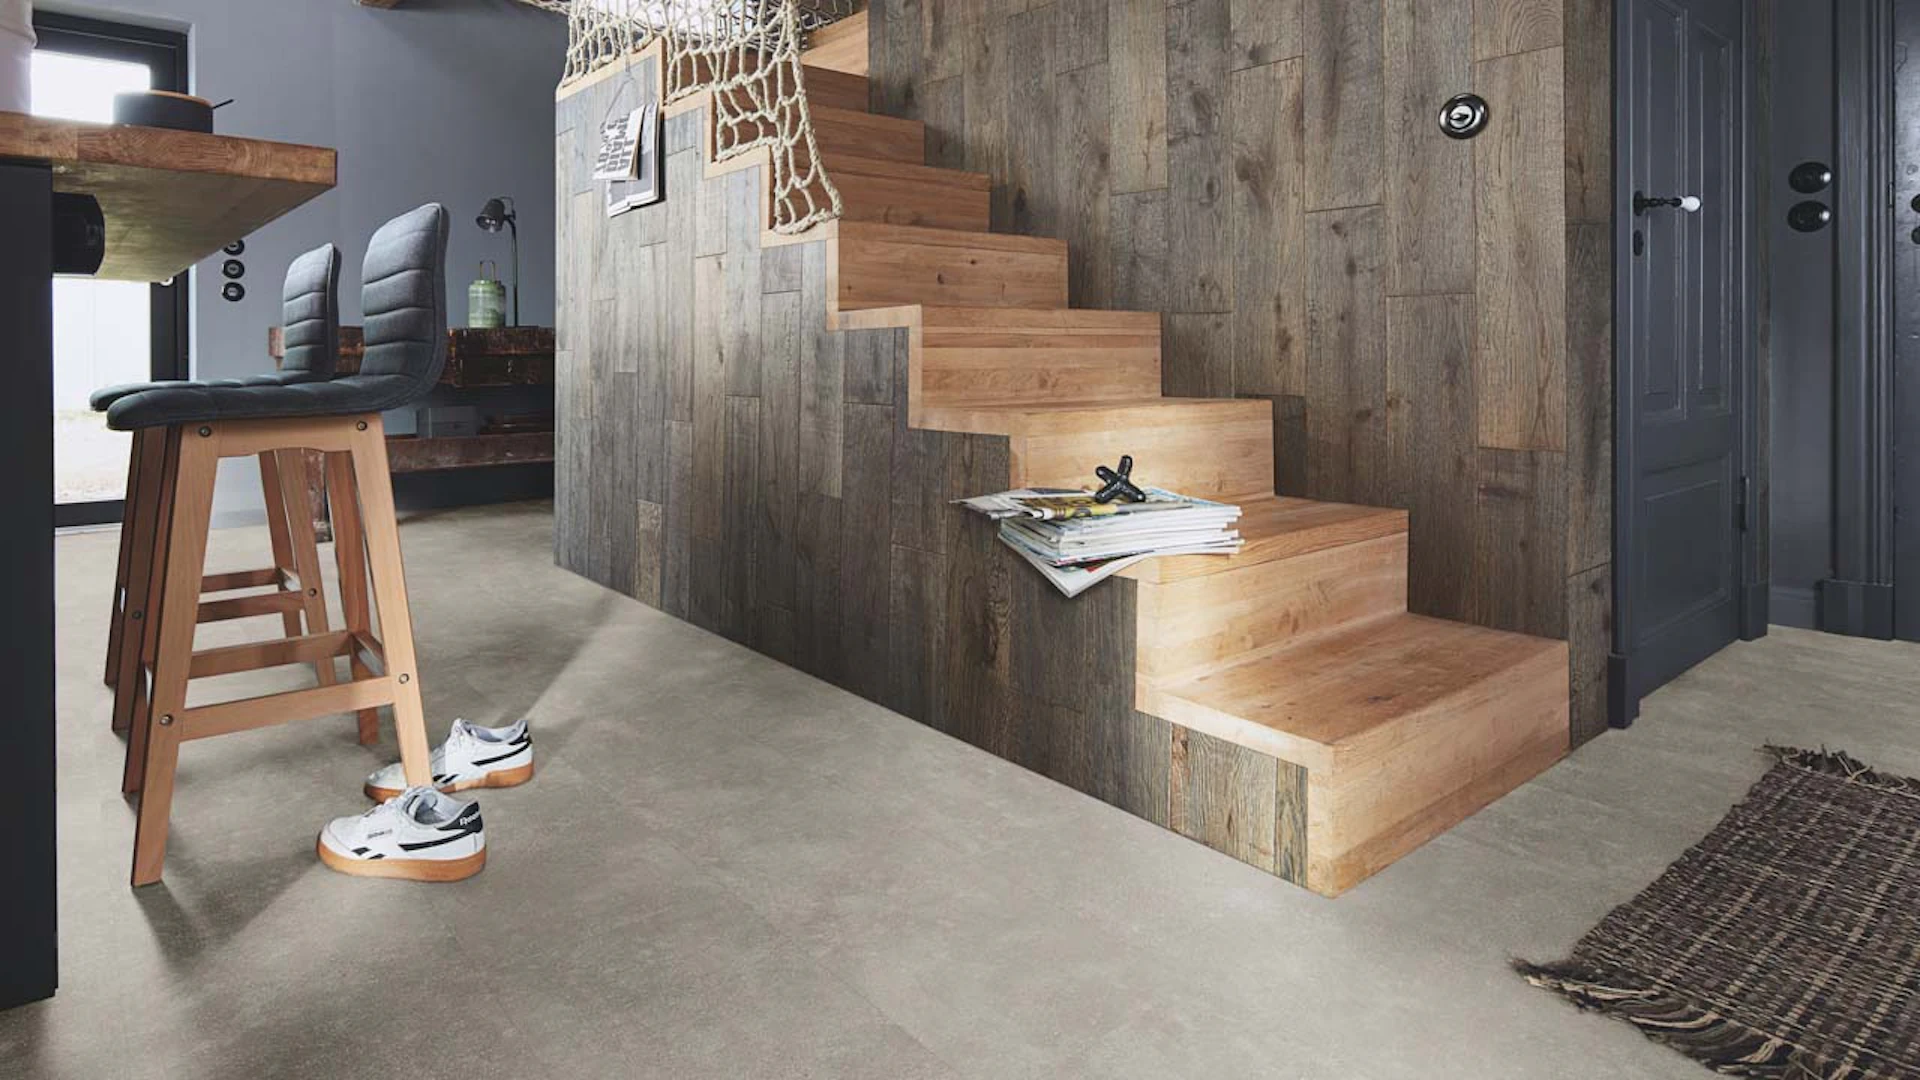 MEISTER Laminat - MeisterDesign LB 150 Mineral Stone 07137 | Made in Germany (600003-0857398-07137)